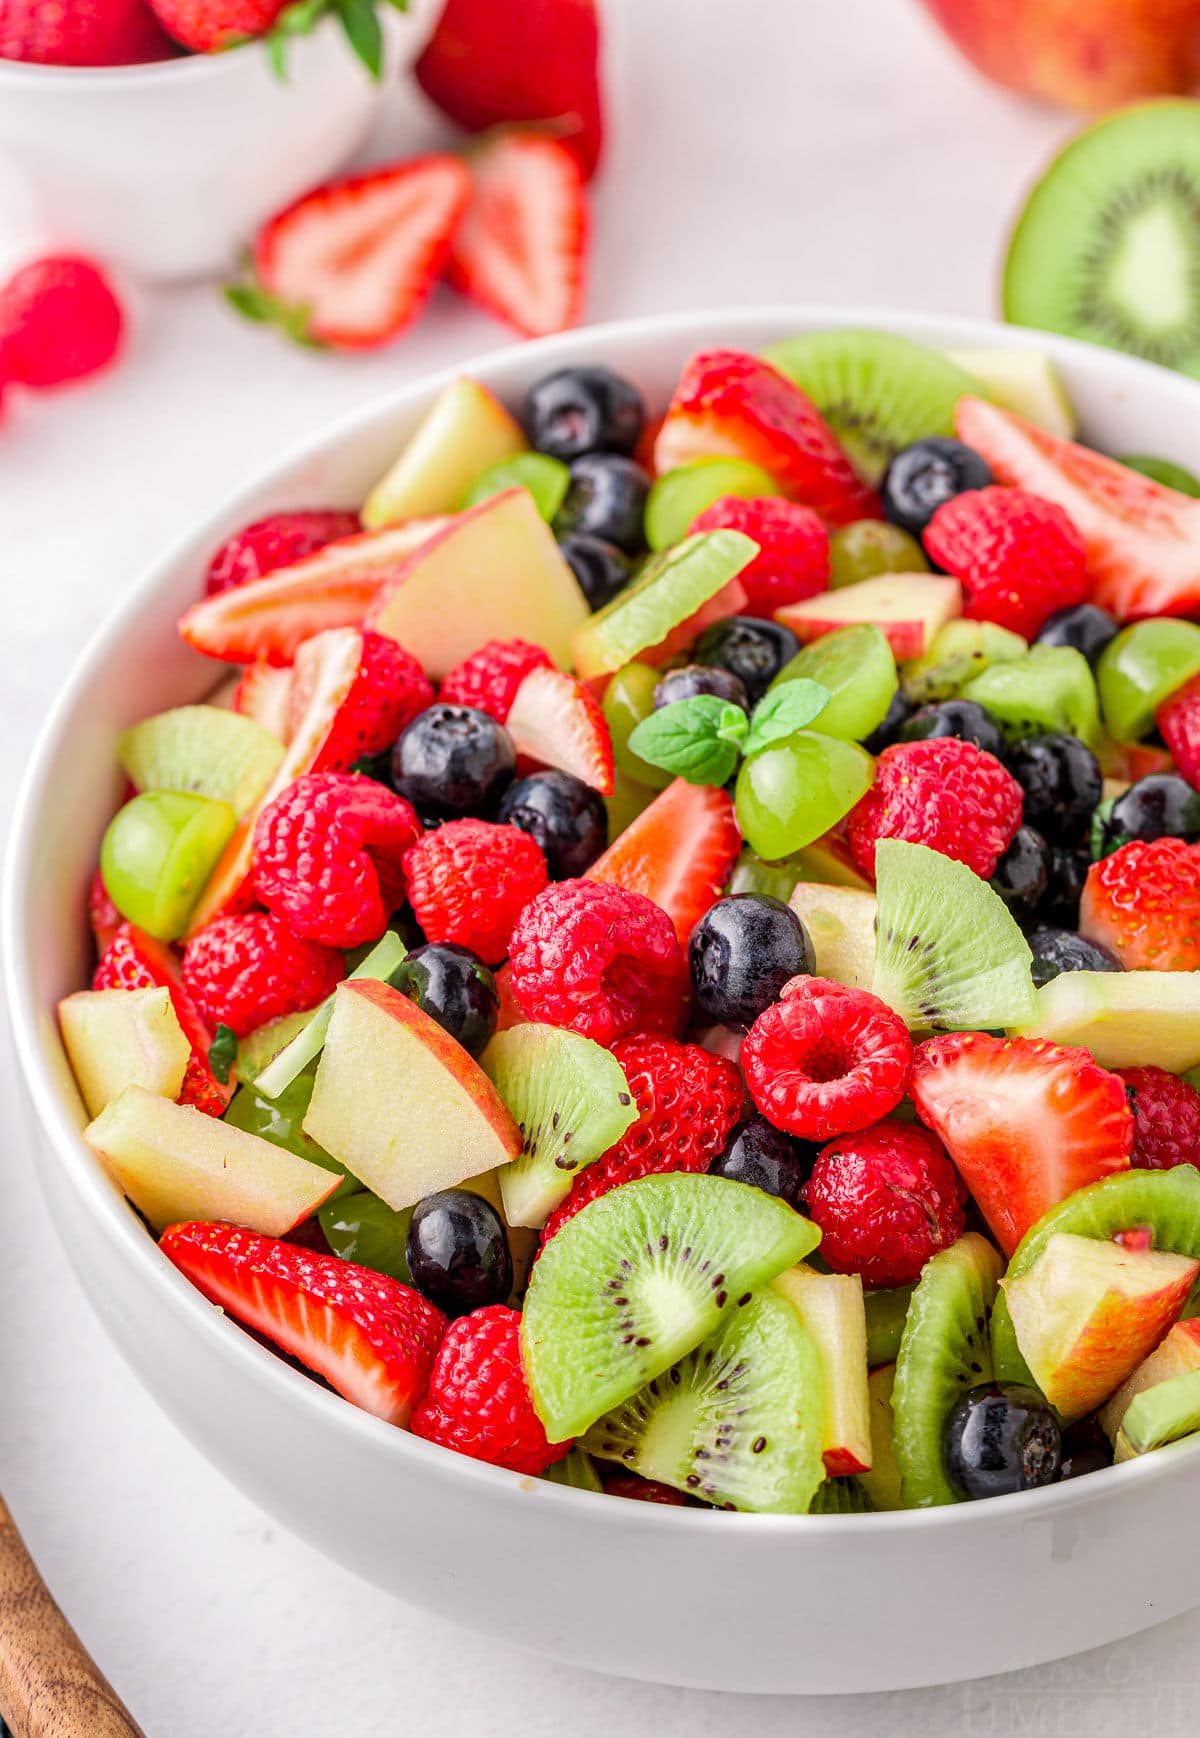 close up look at summer fruit salad in large white serving bowl. Salad has bright red strawberries, raspberries, green kiwis and grapes and blueberries.